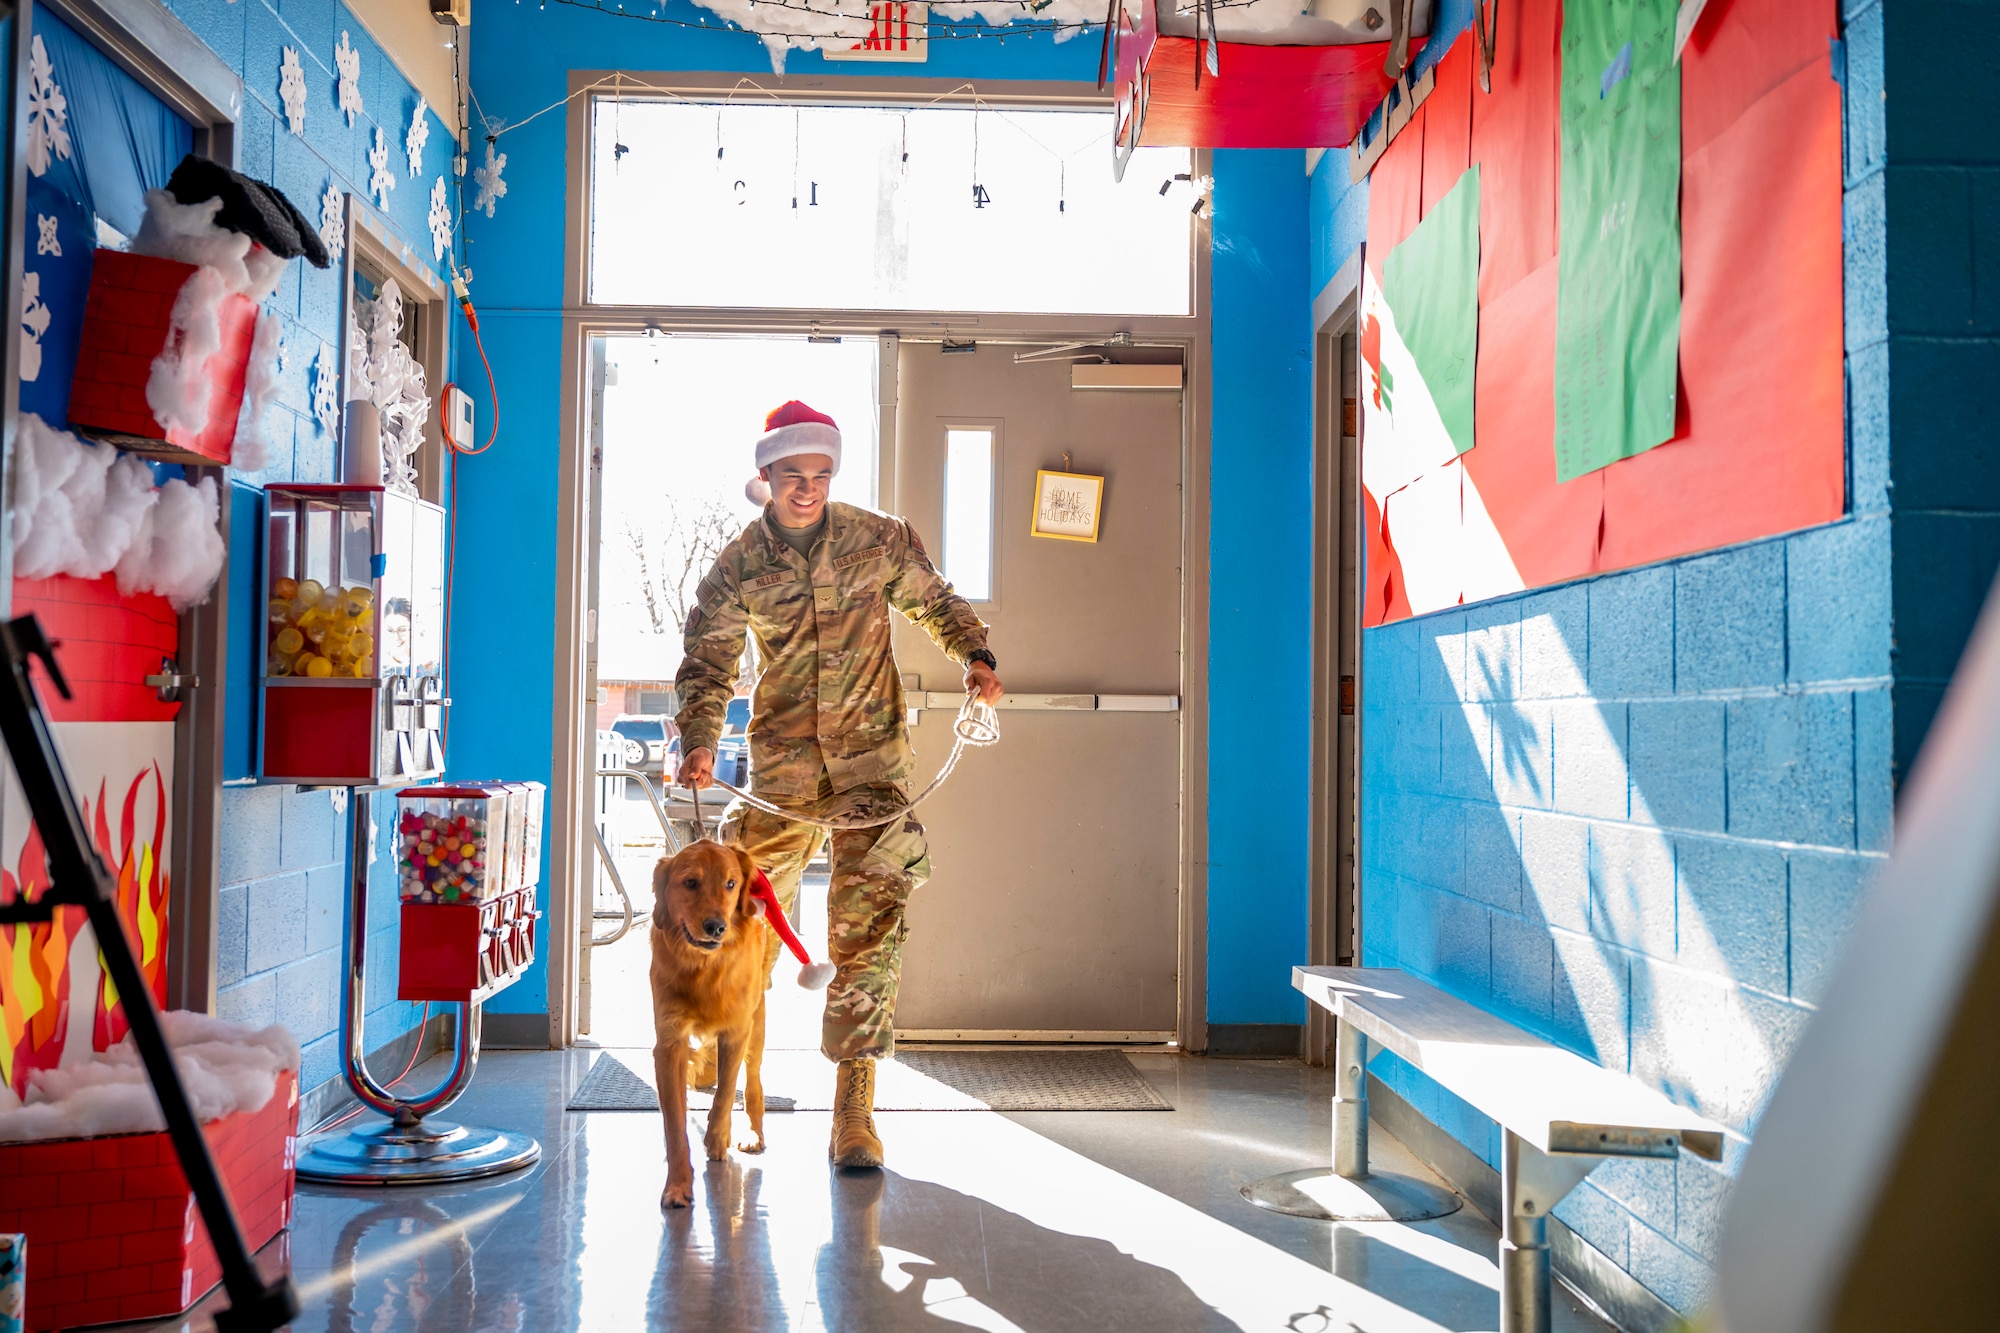 U.S. Air Force Airman Joshua Miller, 77th Weapons Squadron member, walks into the Boys and Girls Club of Abilene to help donate toys after completing the Dyess Rapid Airman Development ruck march in Abilene, Texas, Dec. 14, 2022. The RAD team carried bags of toys during the six-mile ruck march to the Boys and Girls Club of Abilene to donate them to those in need. (U.S. Air Force photo by Senior Airman Leon Redfern)